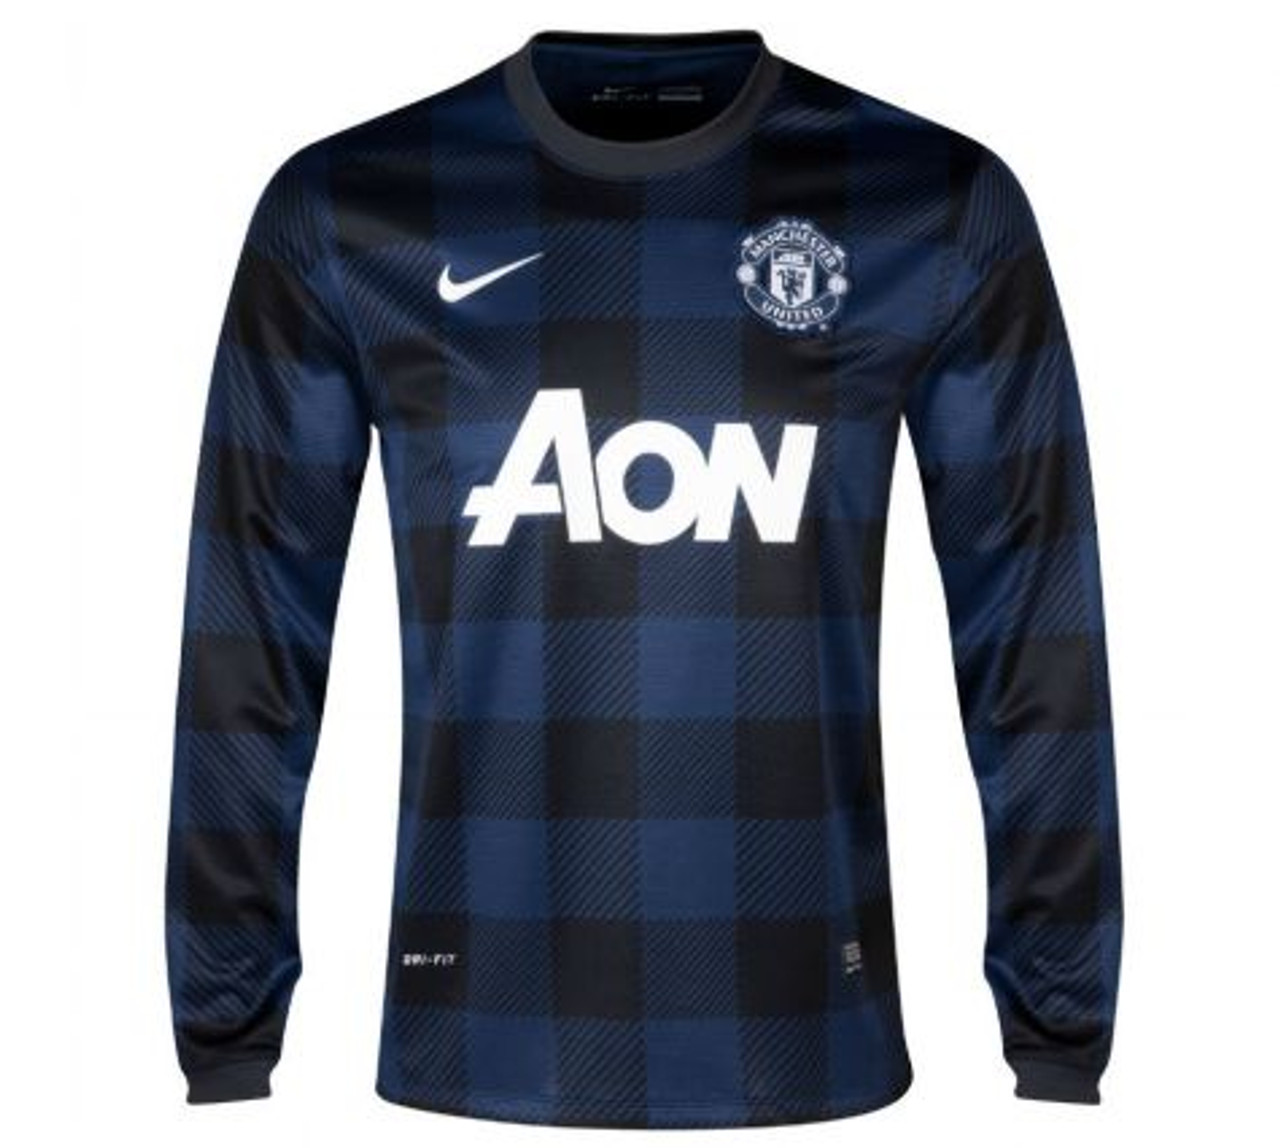 manchester united 2013 jersey